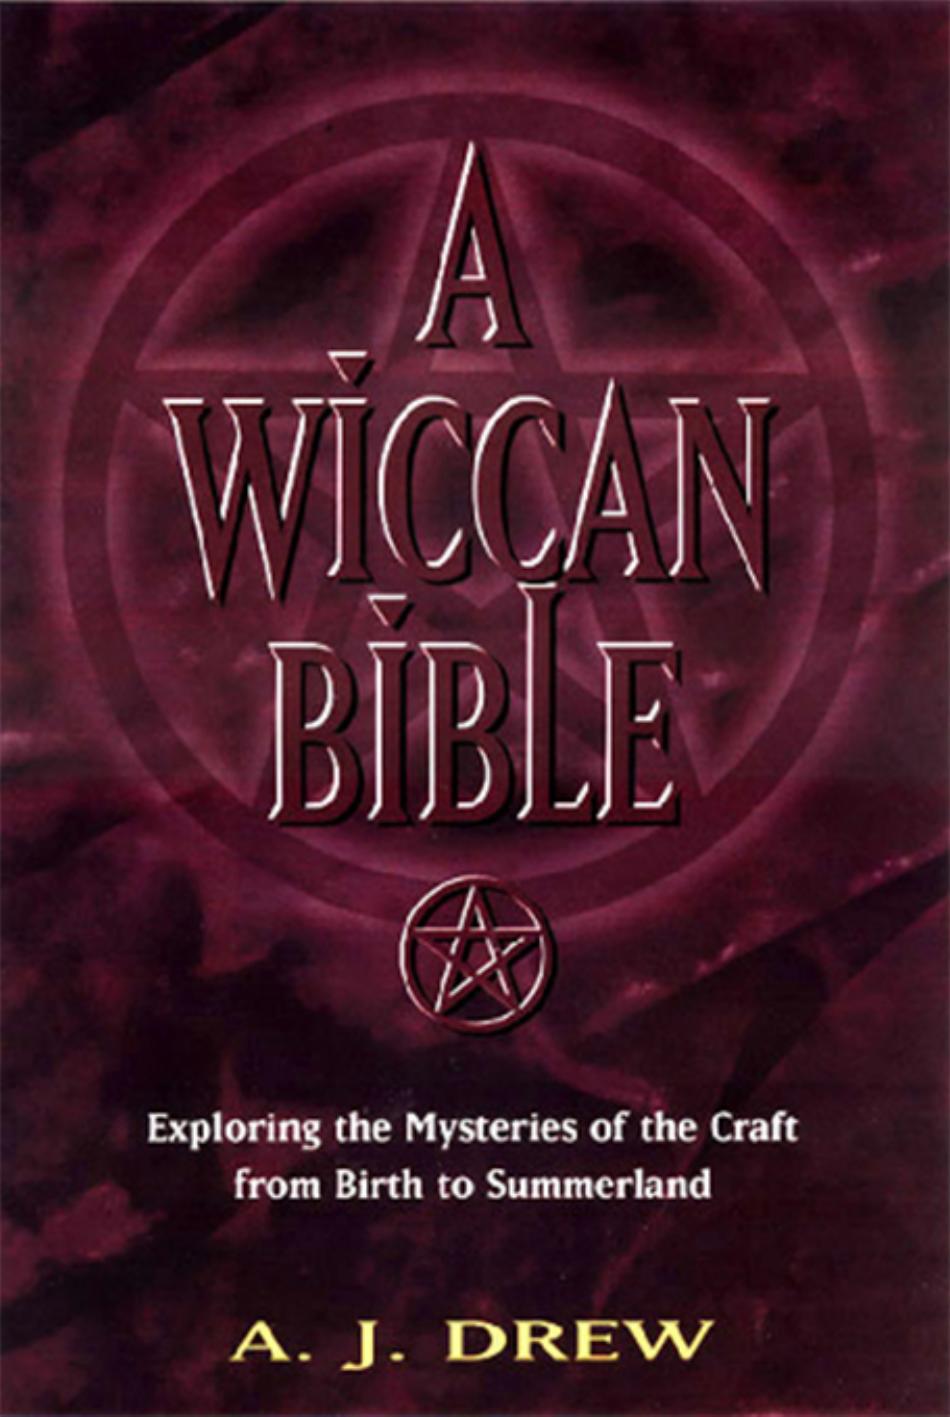 A Wiccan Bible - Exploring the Mysteries of the Craft from Birth to Summerland